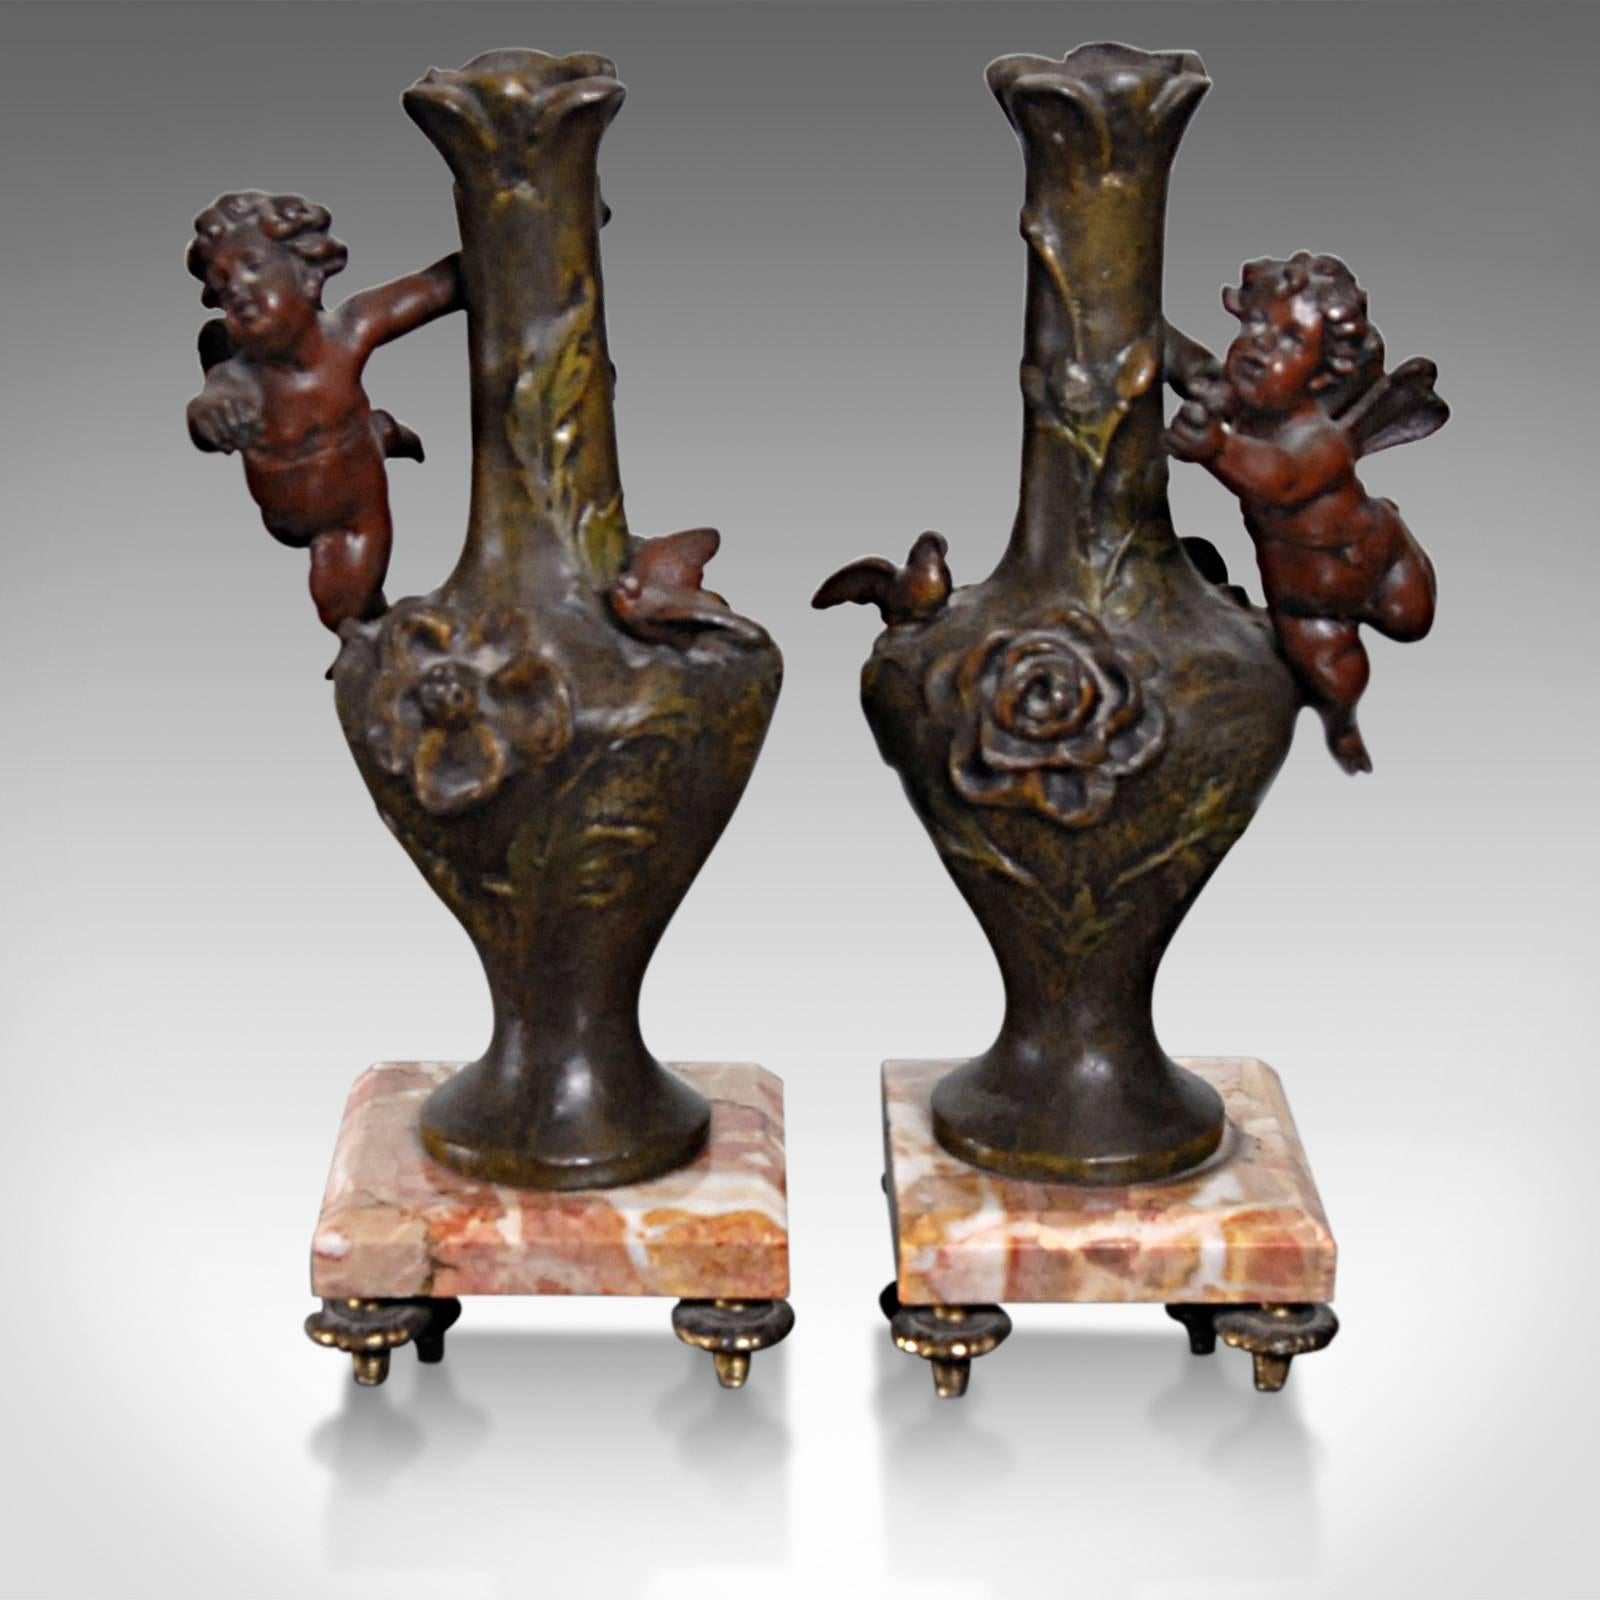 This is an antique pair of candlesticks in the form of cherubs and urns upon marble plinths. Although they could equally well serve as vases for individual flowers when not supporting an elegant candlestick.

Delightful in every aspect, this pair